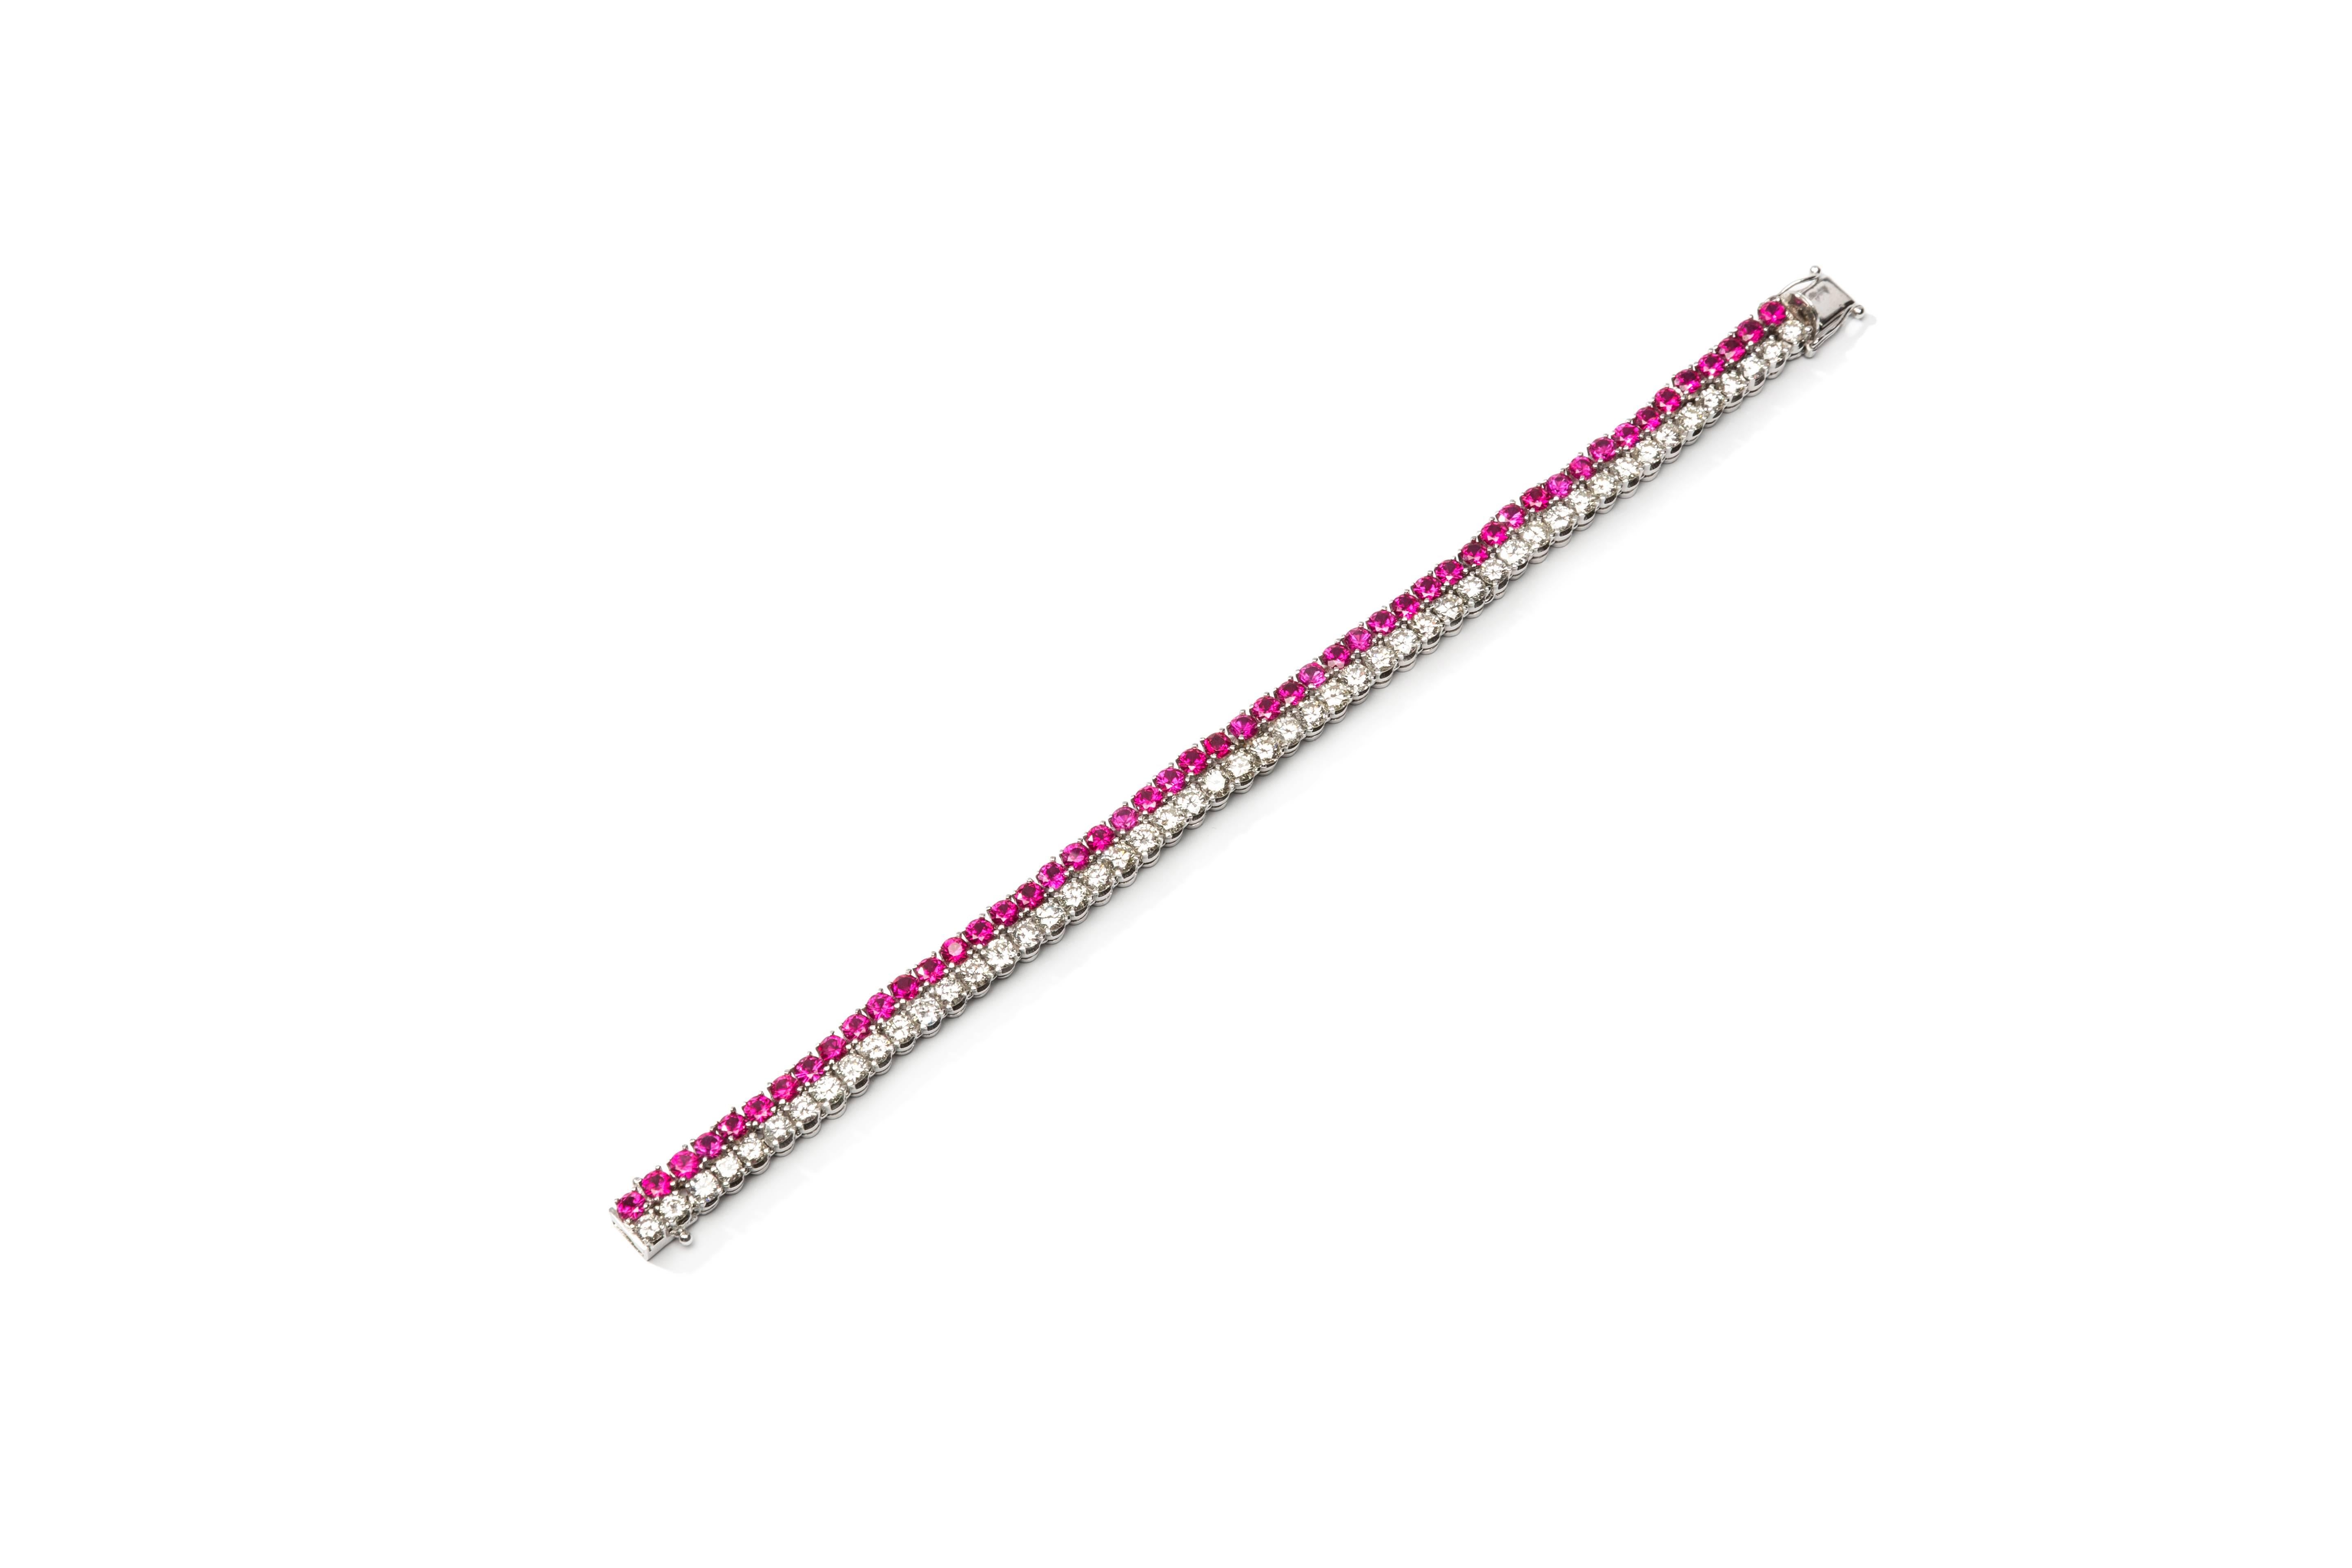 Tennis bracelet, Germany 1960's. Two row bracelet consisting of 1 row 50 Burma rubies weighing circa 11,97 ct. and 1 row of 50 brilliant-cut diamonds weighing approximately 9,0 ct., clarity FL-VVS1, color TW. Mounted in 18K white gold. Hallmarked